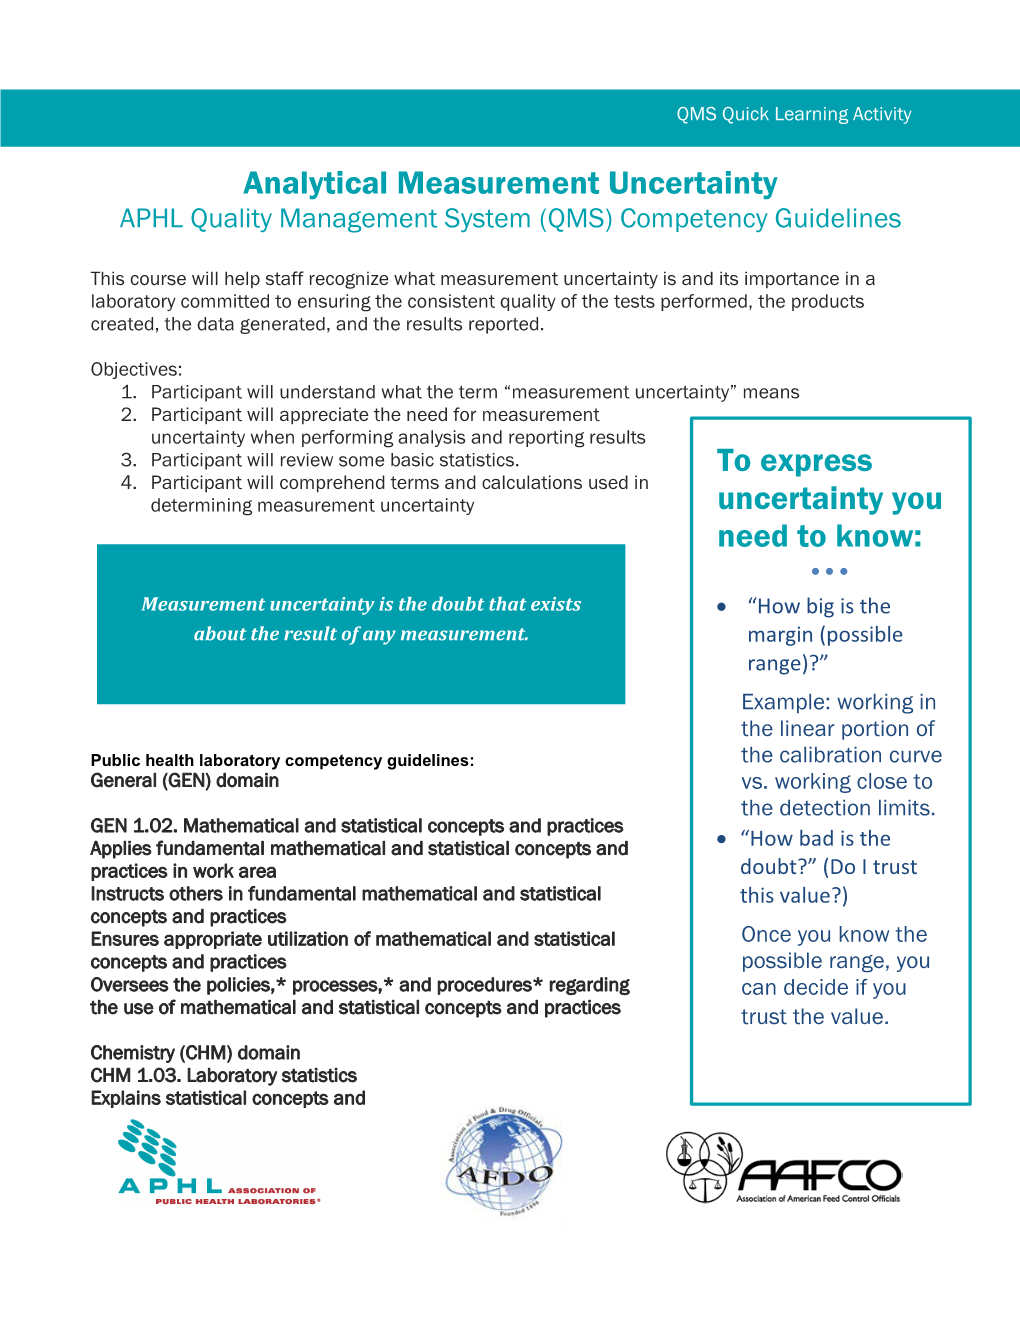 Analytical Measurement Uncertainty APHL Quality Management System (QMS) Competency Guidelines